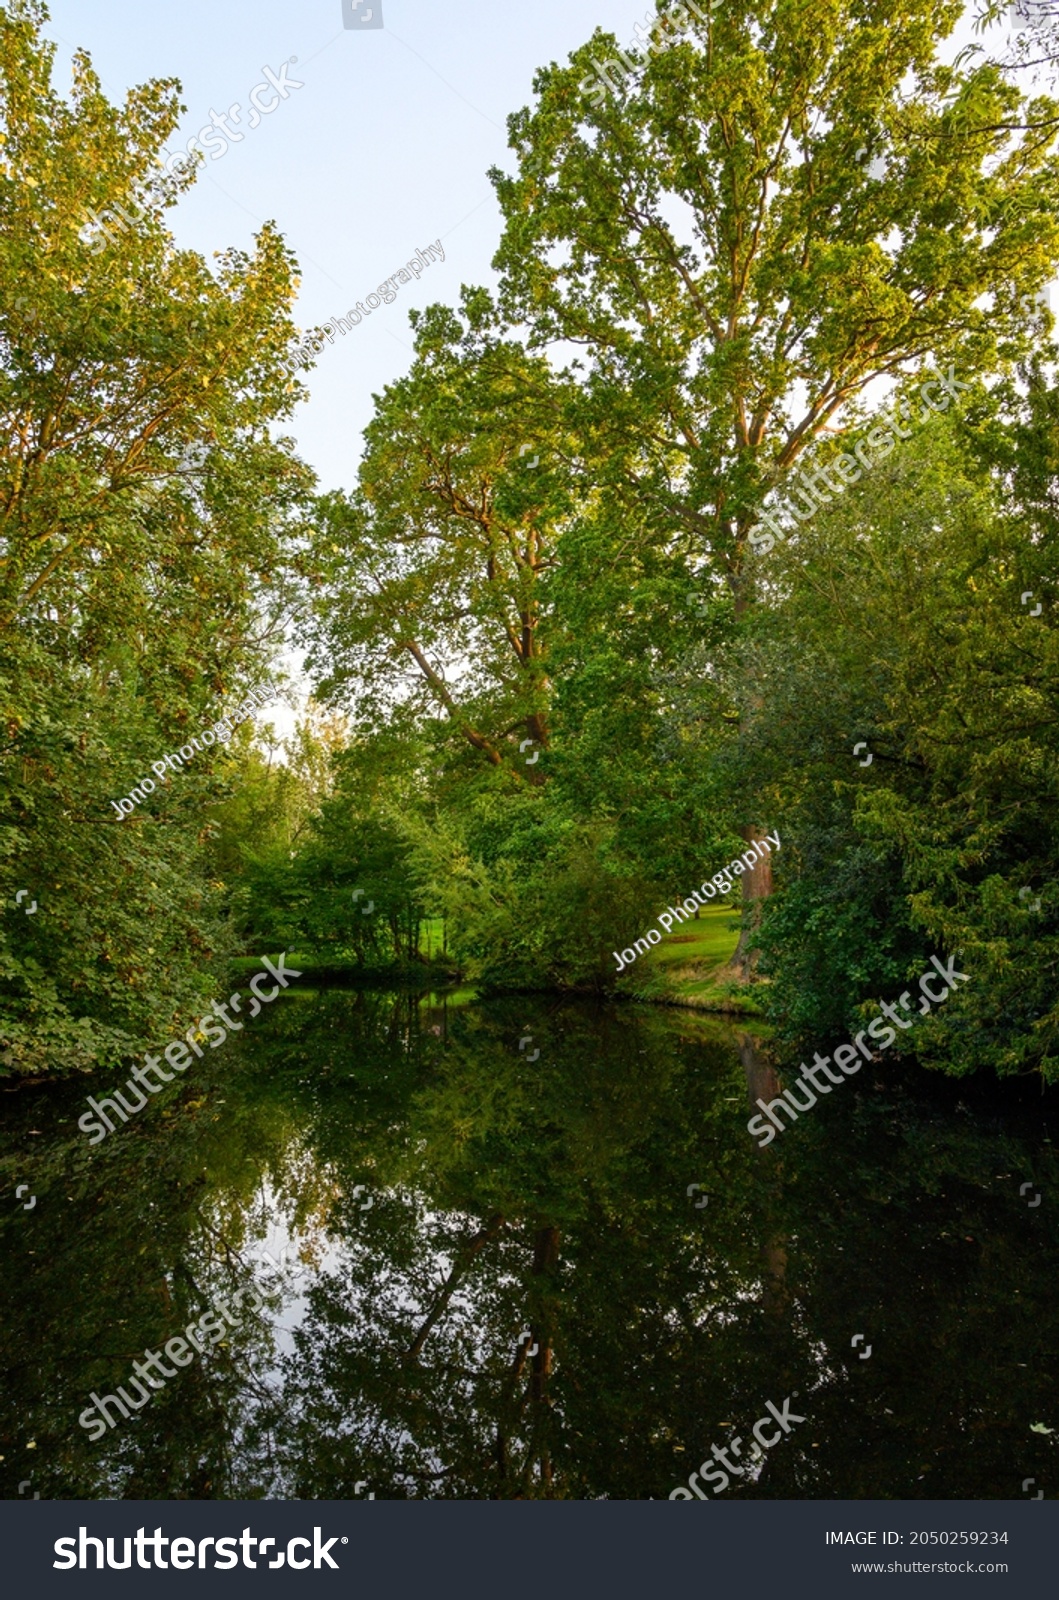 Reflections on the water of a small lake or pond with trees. This lake is in The Knoll, a small PUBLIC PARK in Hayes, Kent, UK. Hayes is in the Borough of Bromley in Greater London. #2050259234